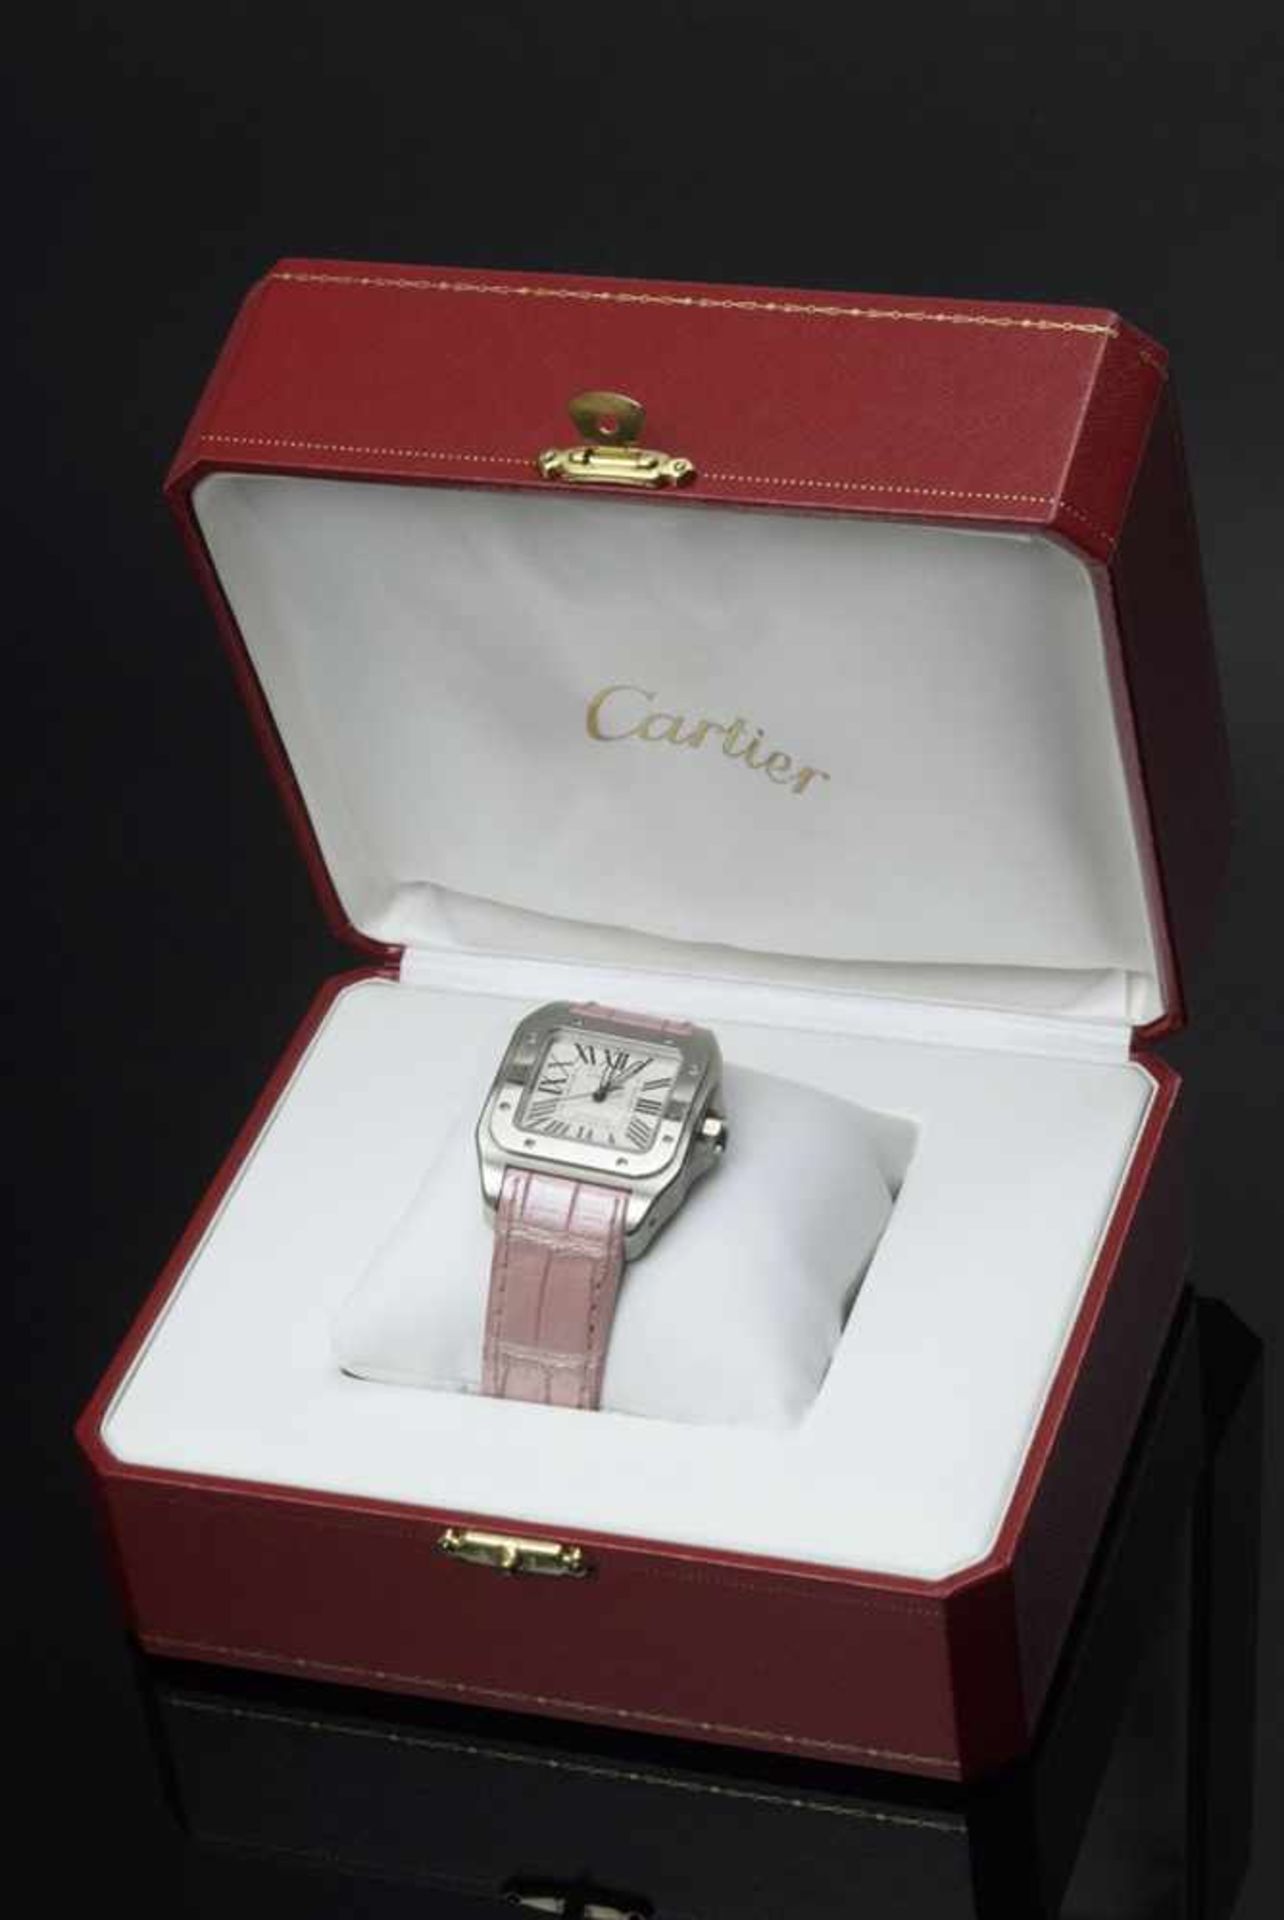 Cartier "Santos 100" watch, stainless steel, automatic movement, silver-coloured dial with Roman - Image 3 of 7